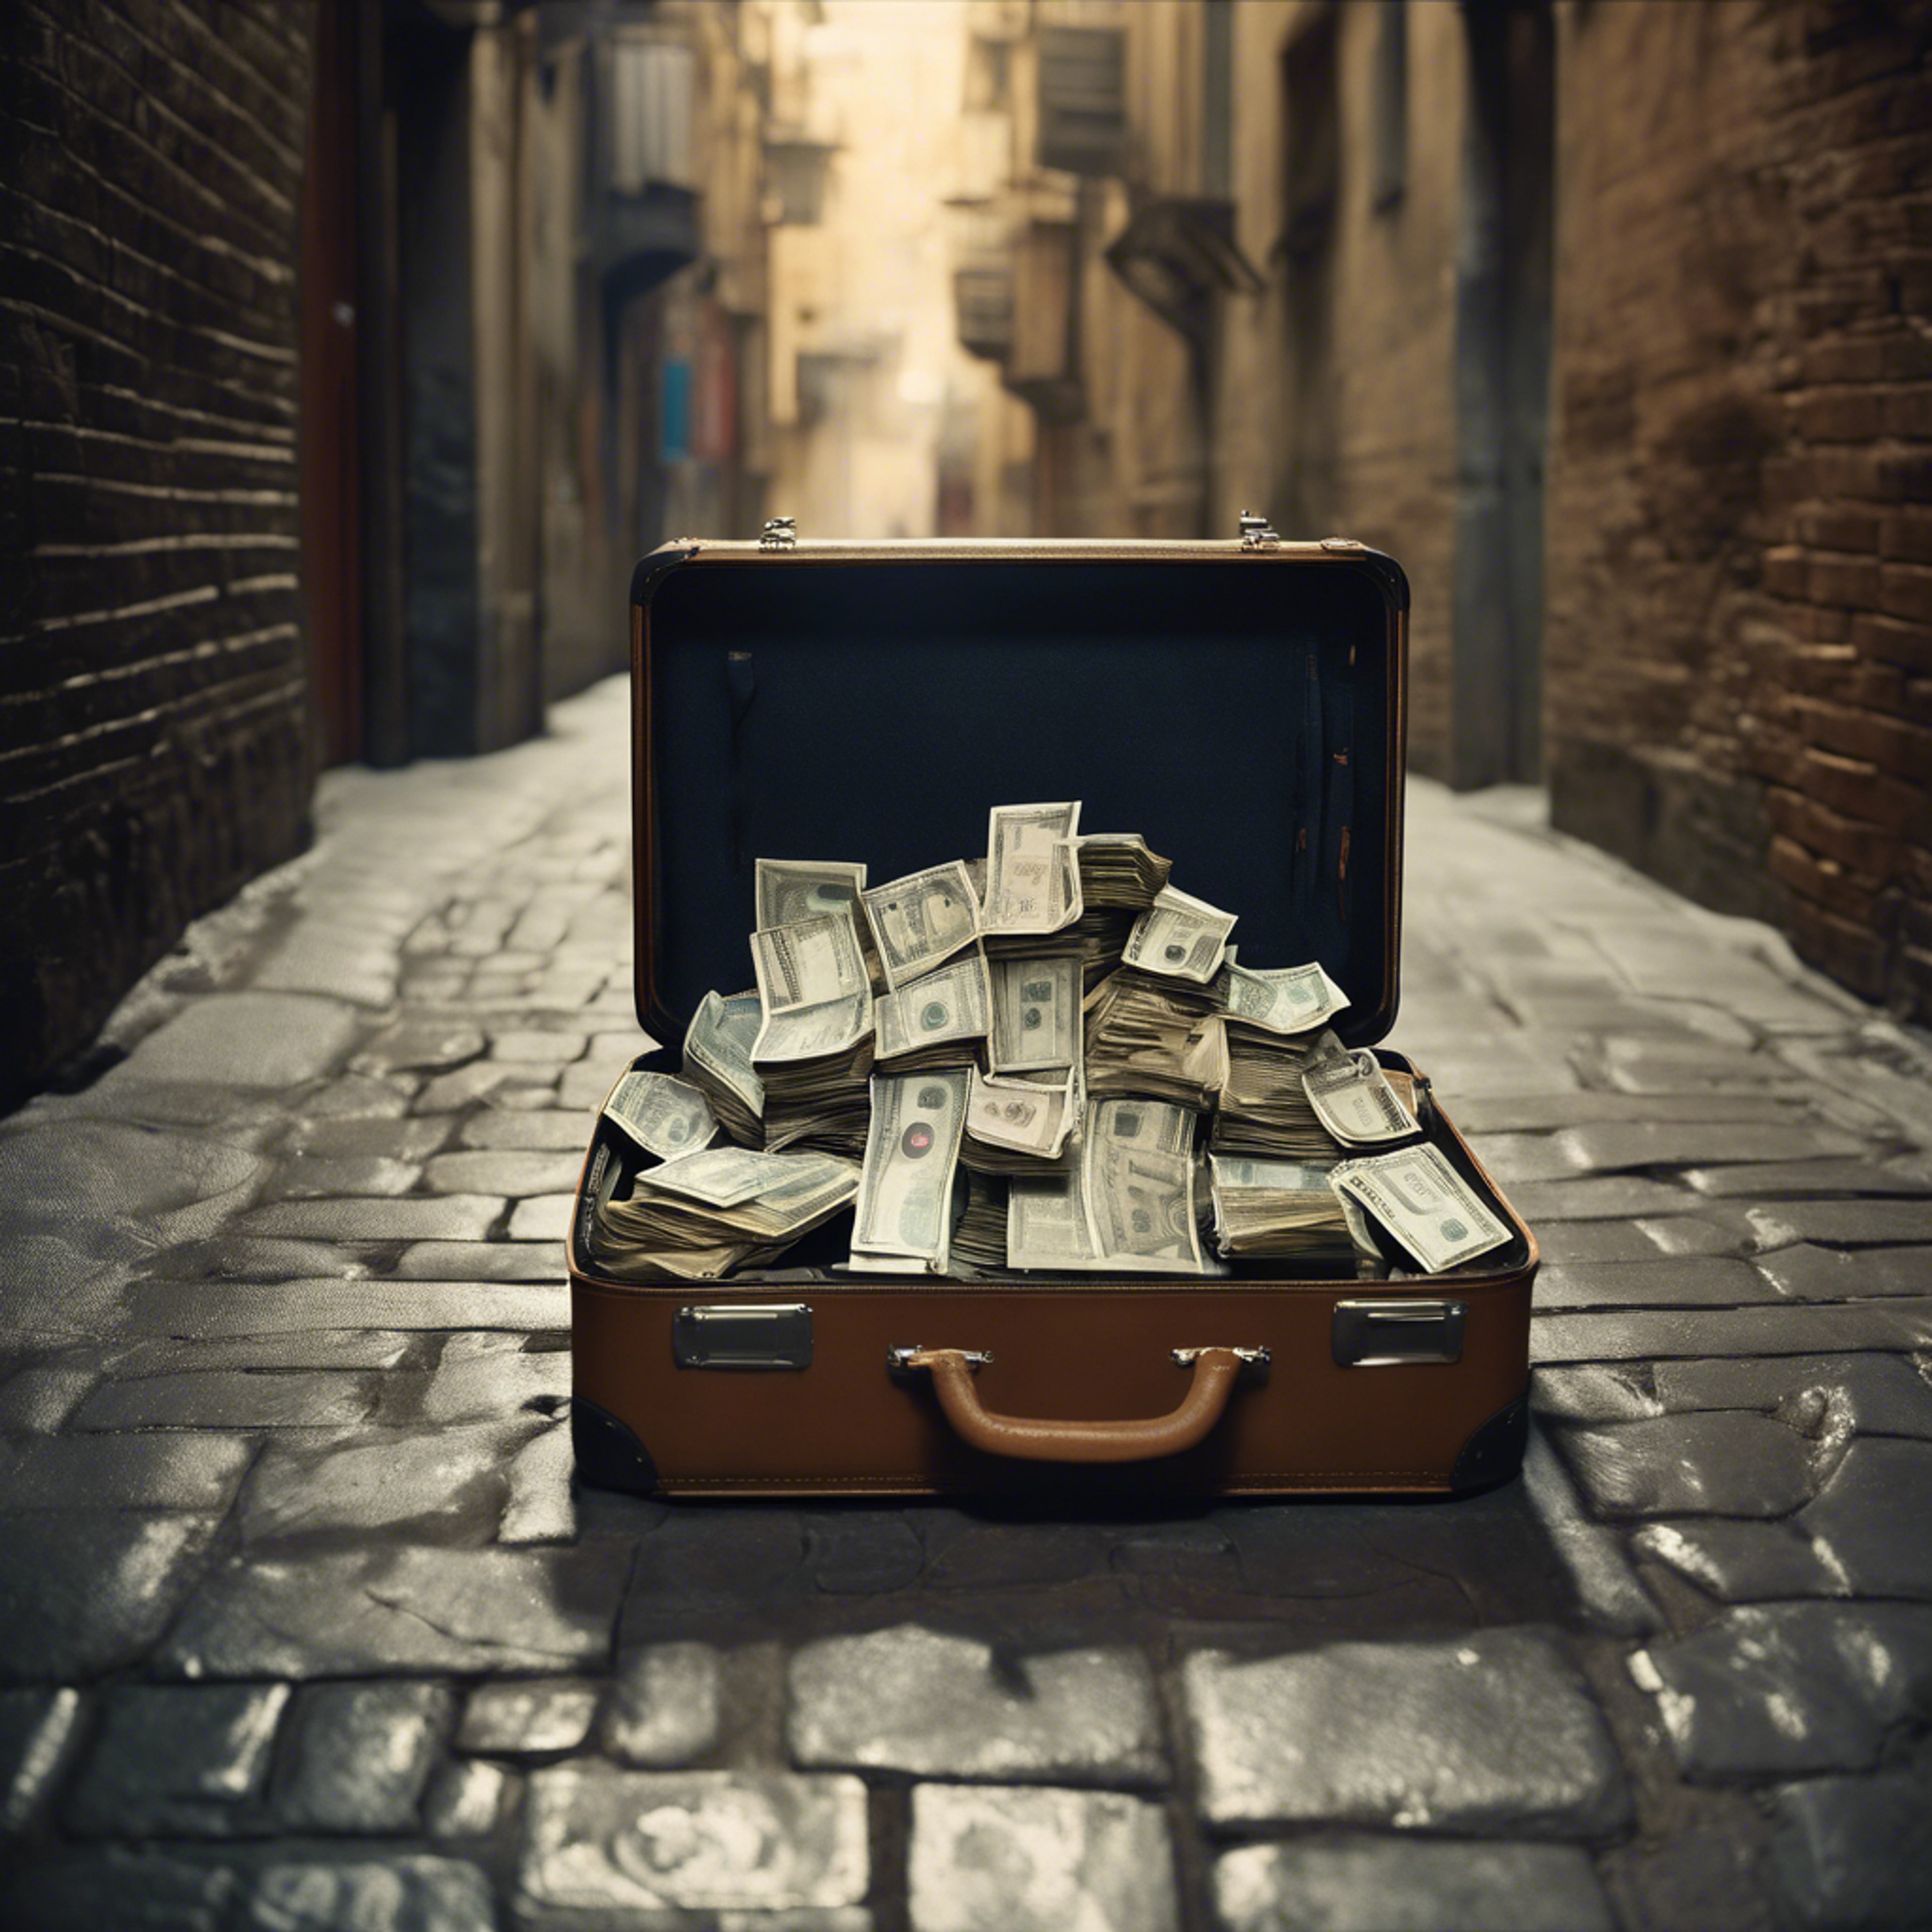 A suitcase filled with mafia money being exchanged in dimly lit alleyway. Wallpaper[001aead7b2c840f5bbce]